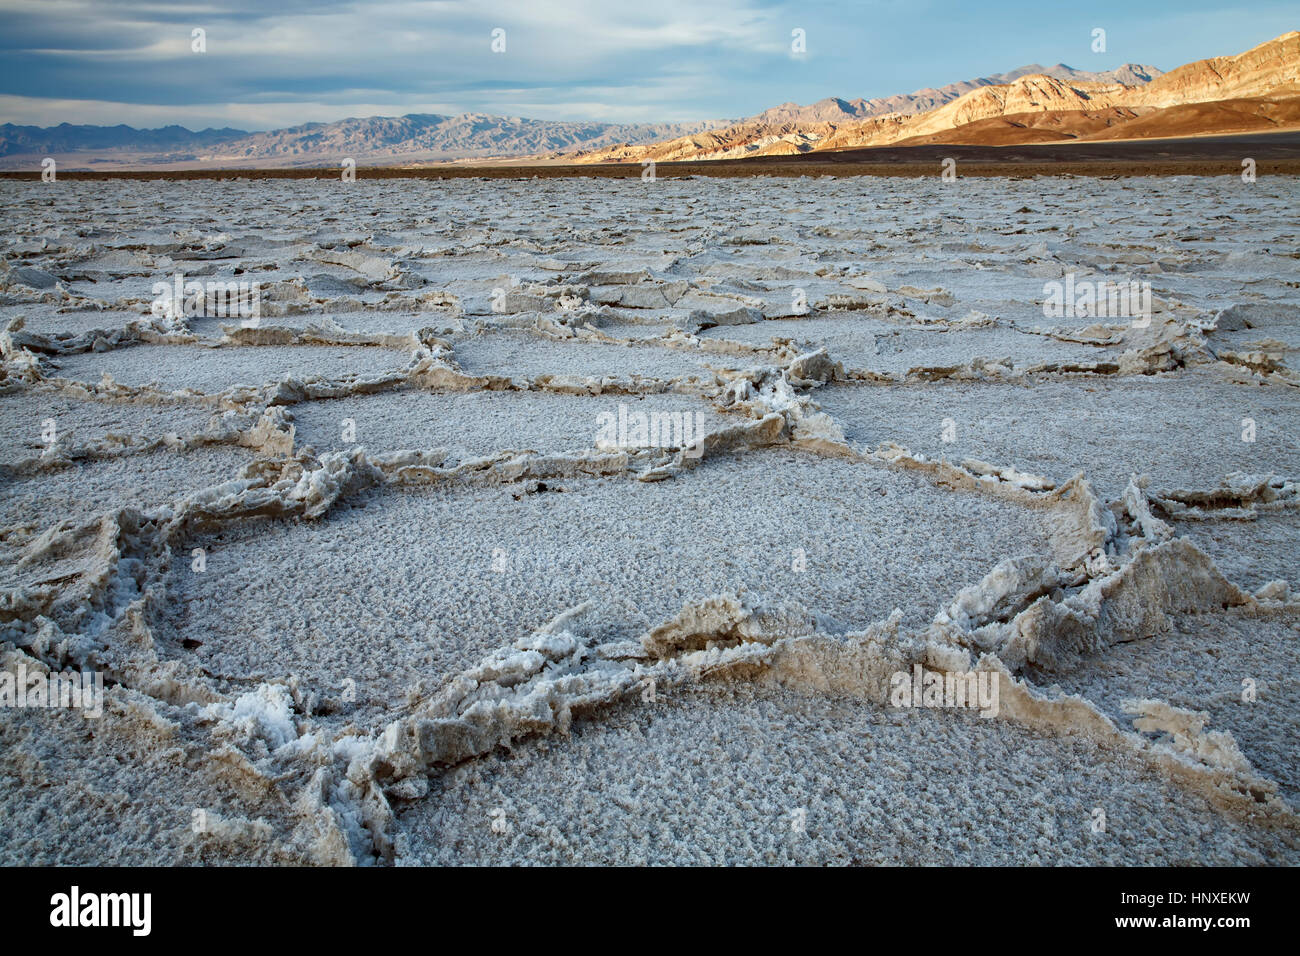 12.2005 salines, Badwater Basin, Death Valley National Park, California USA Banque D'Images